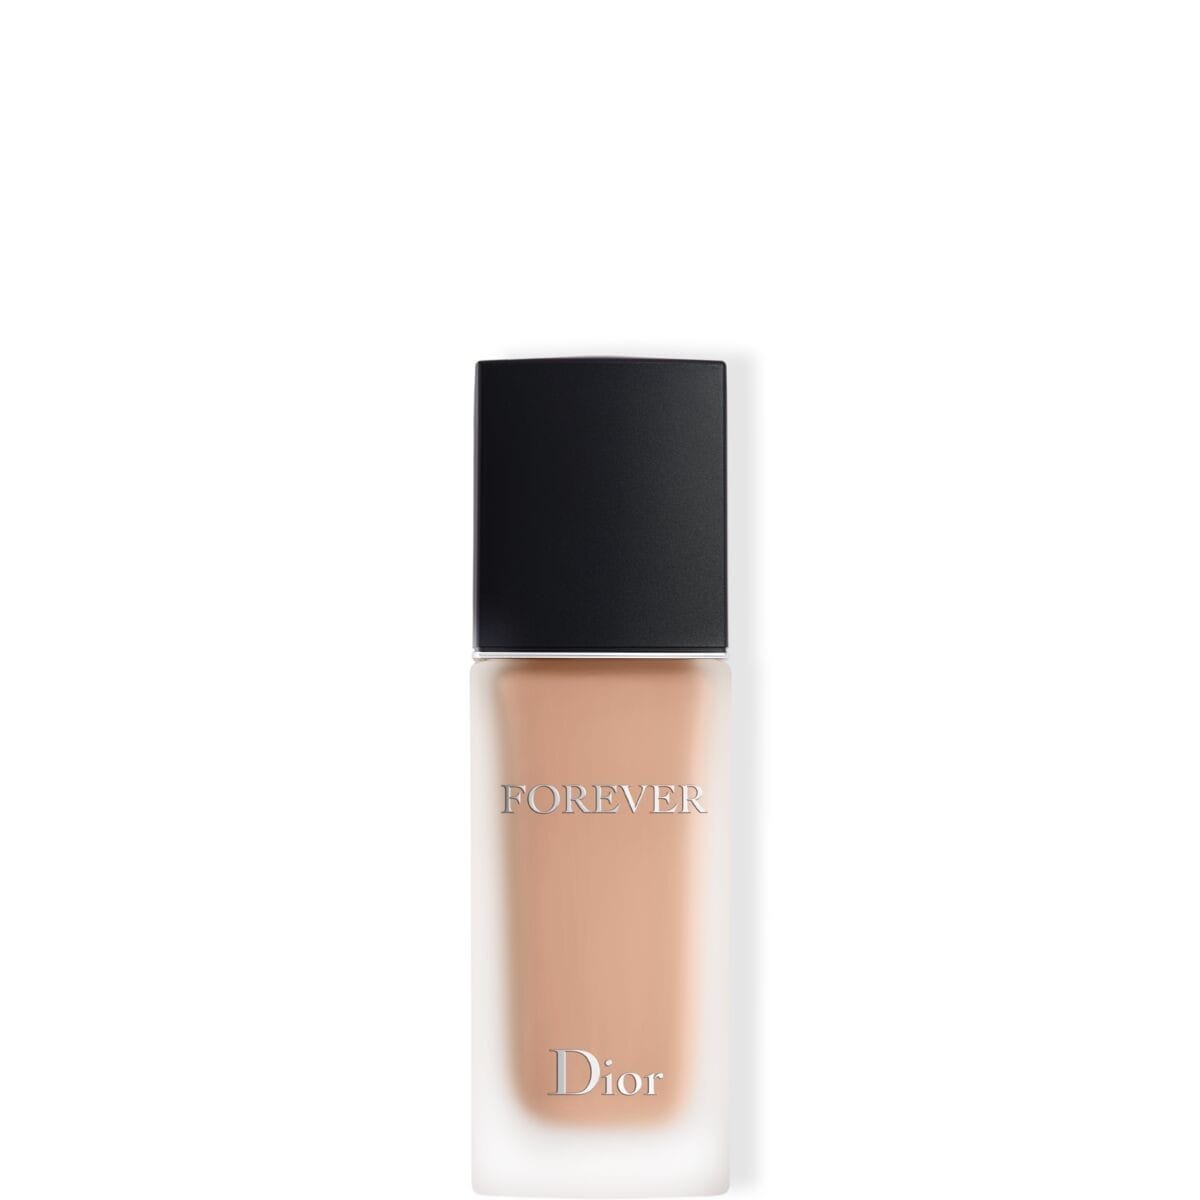 Forever Dior Forever Foundation 24h stop Matt, No. 3cr - Cool Rosy